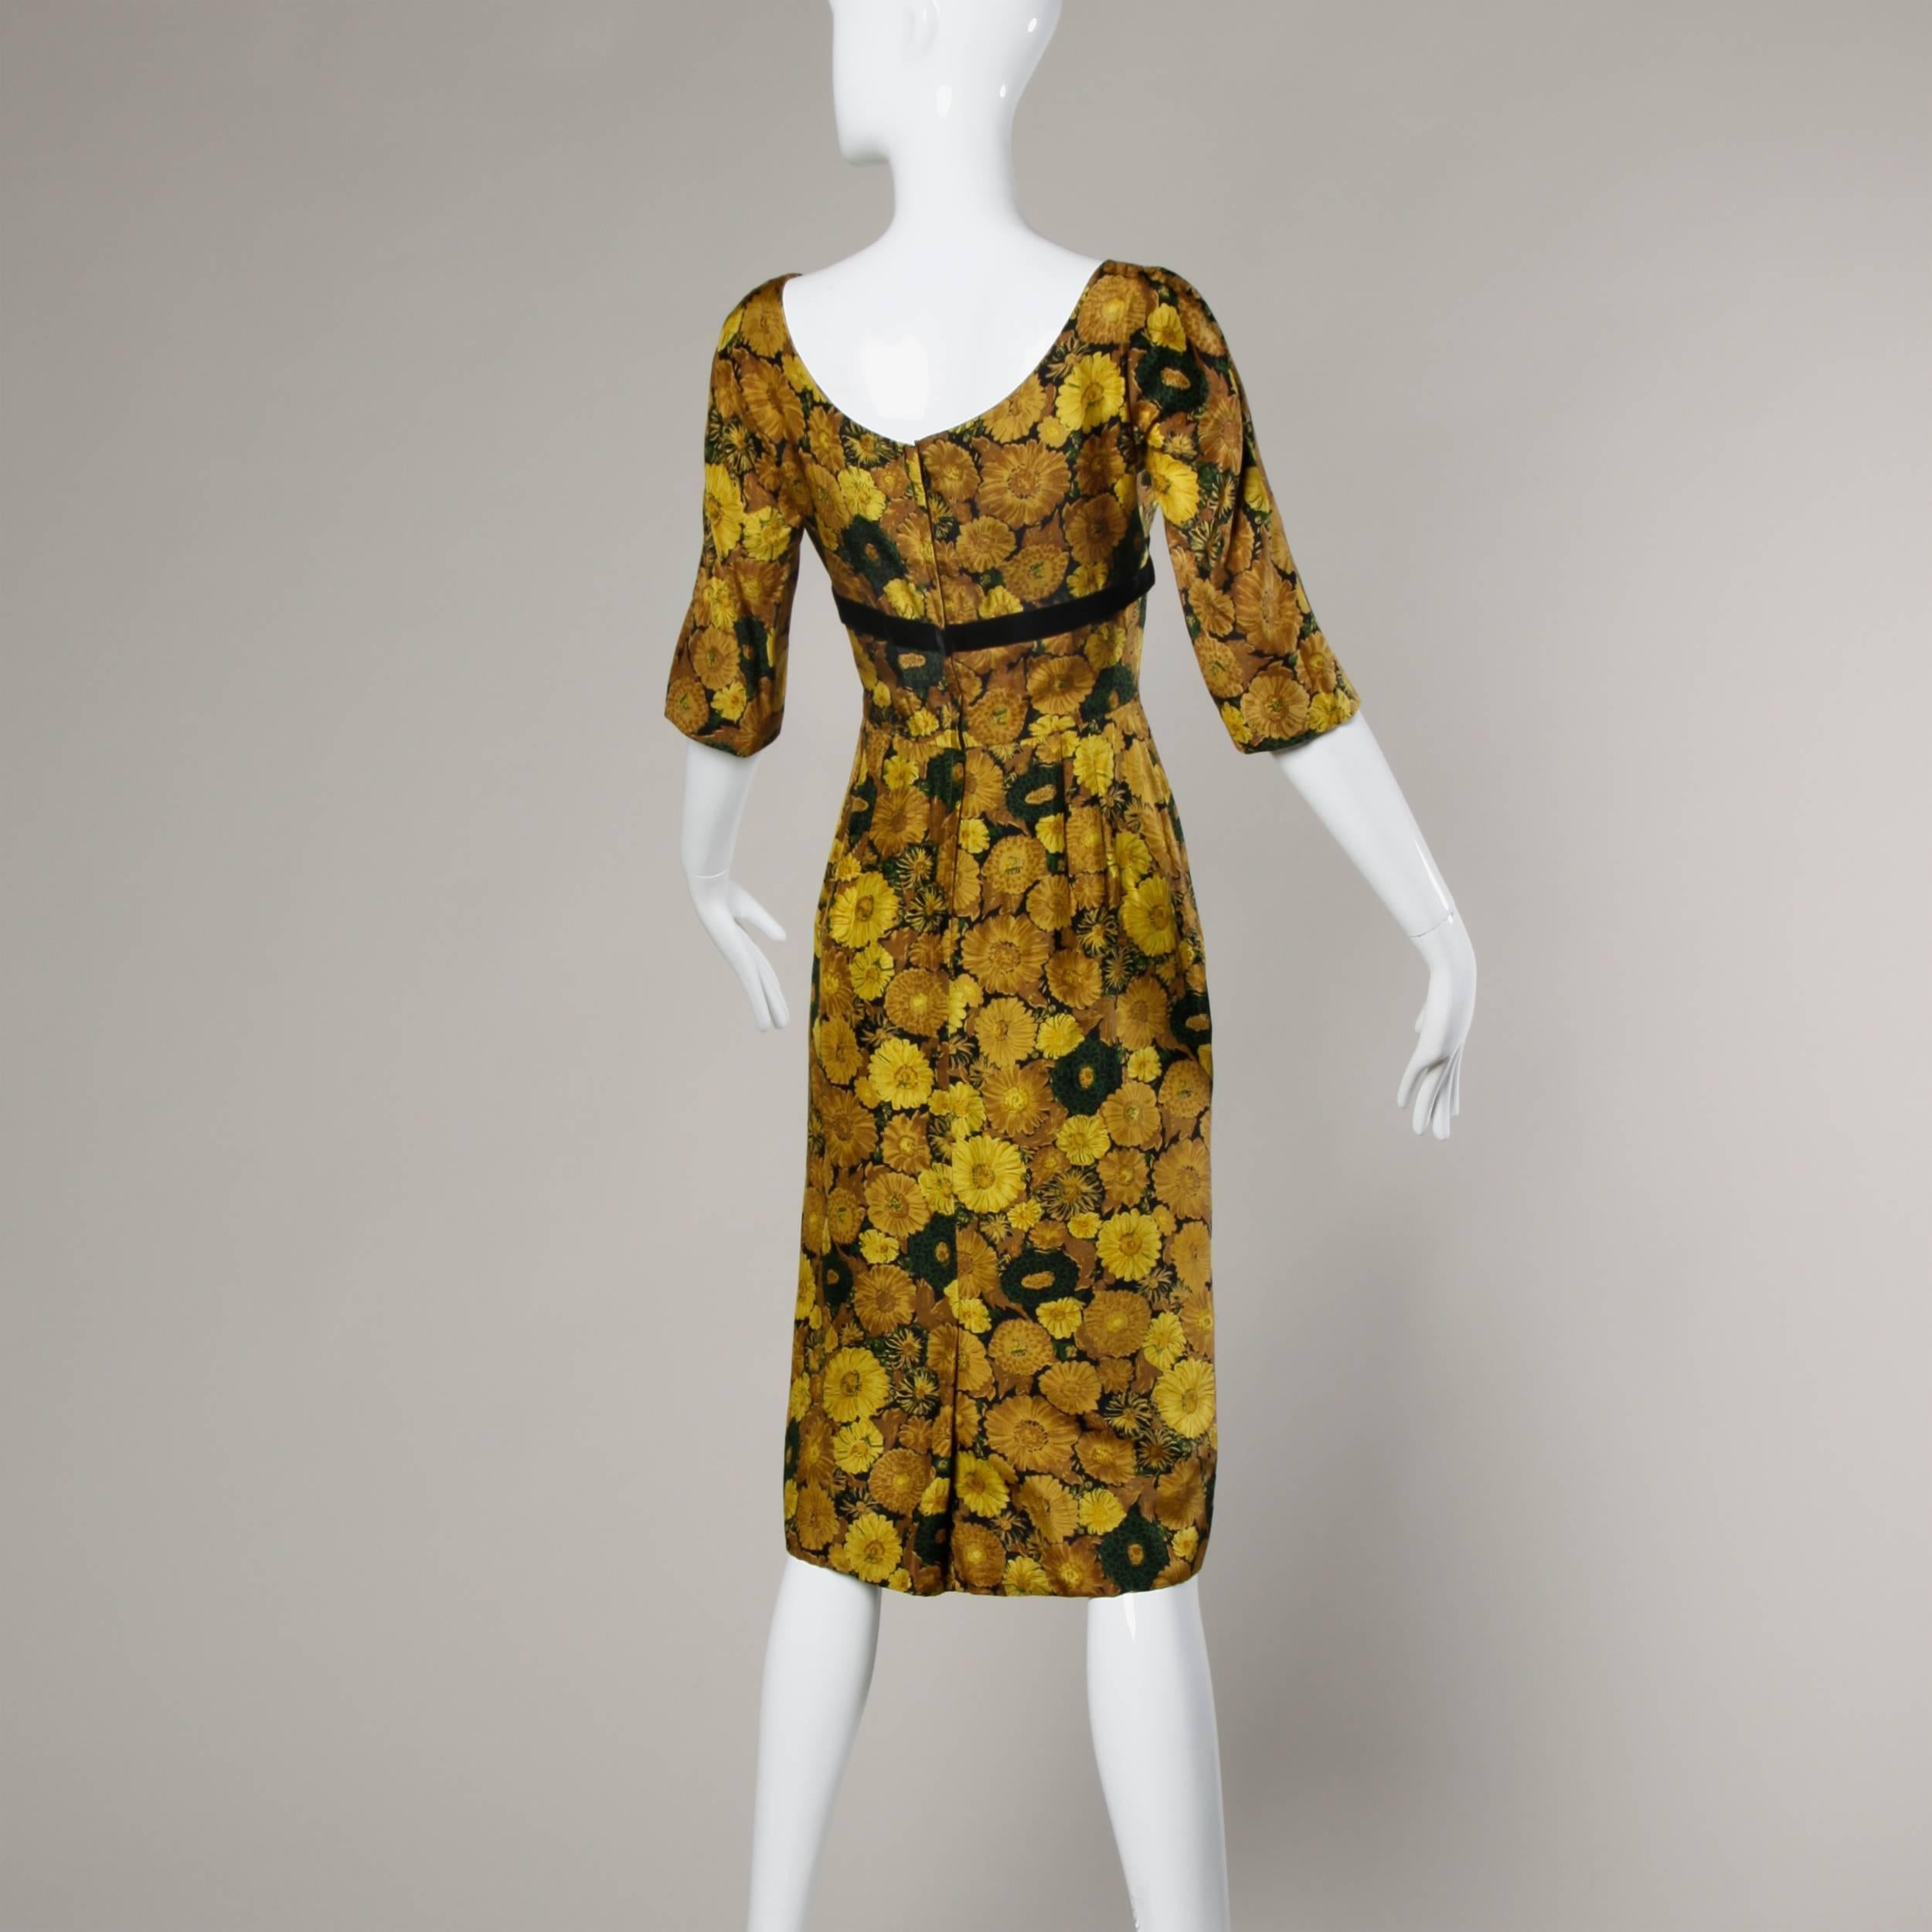 Vintage Silk Yellow Floral Print Cocktail Dress, 1950s-1960s In Excellent Condition For Sale In Sparks, NV